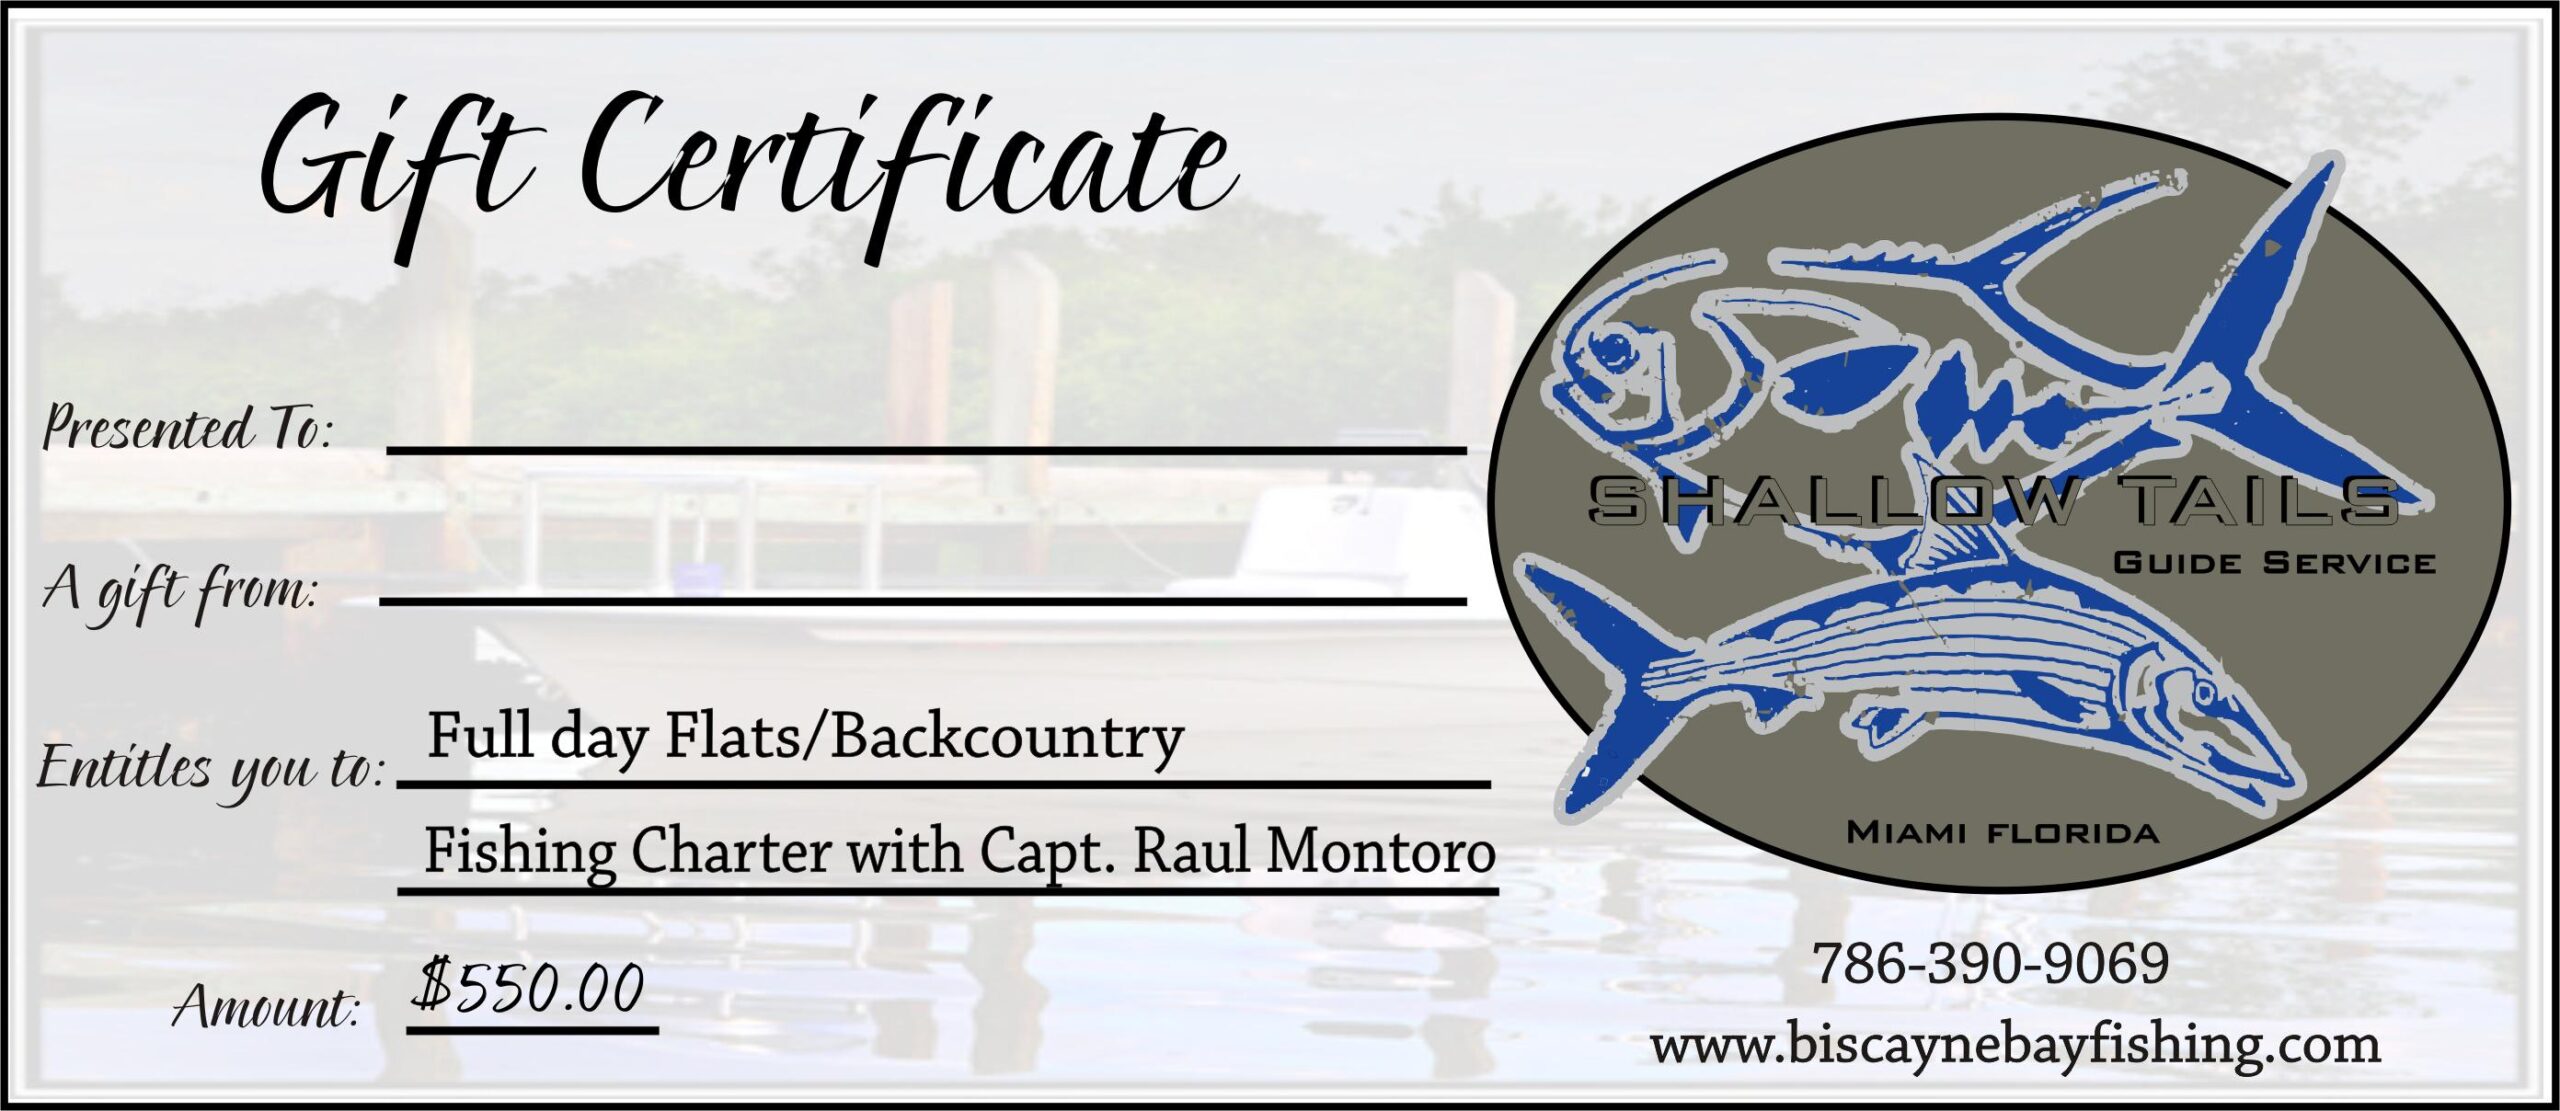 Miami Florida Fishing Guides:Holliday Gift Certificates,Biscayne Bay